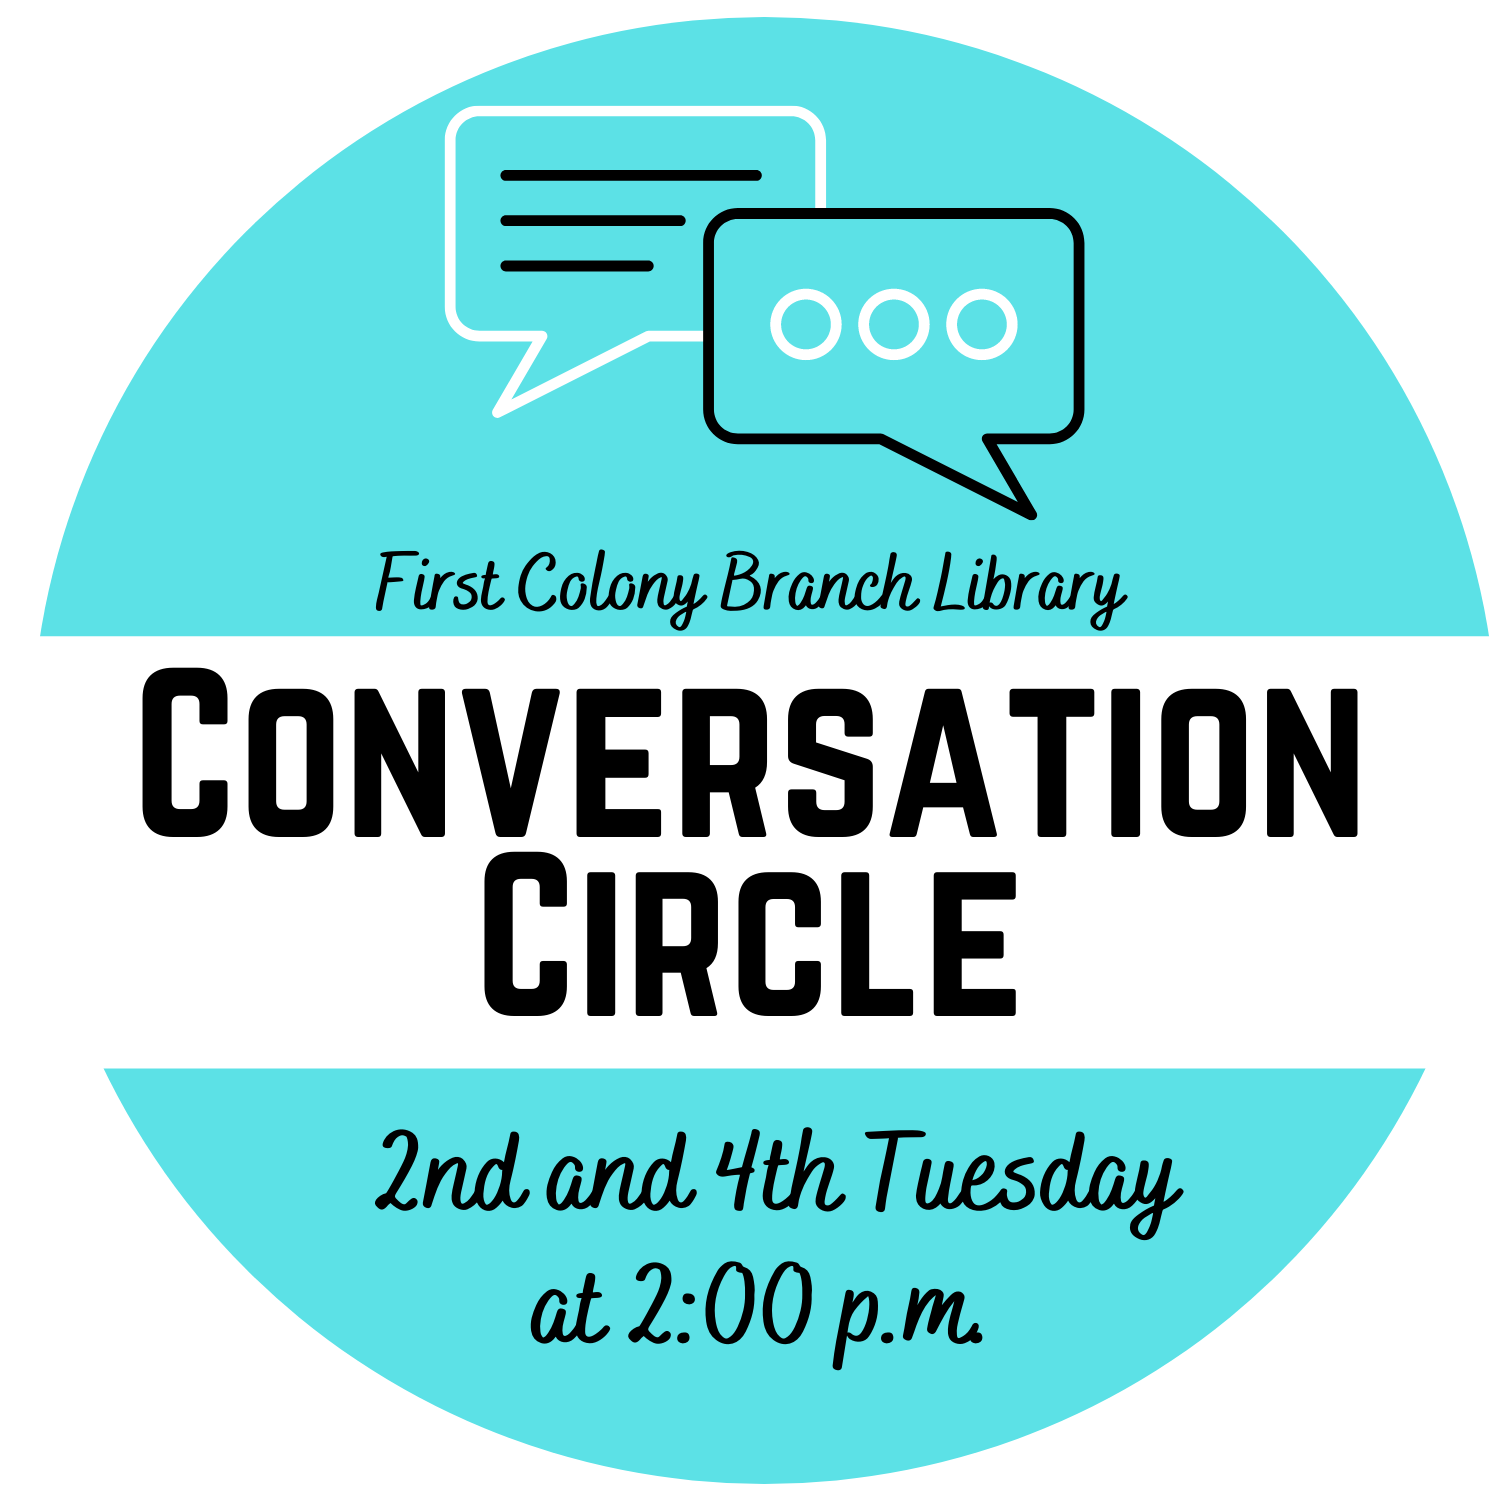 Picture of speech bubbles and text Conversation Circle 2nd and 4th Tuesday at 2pm